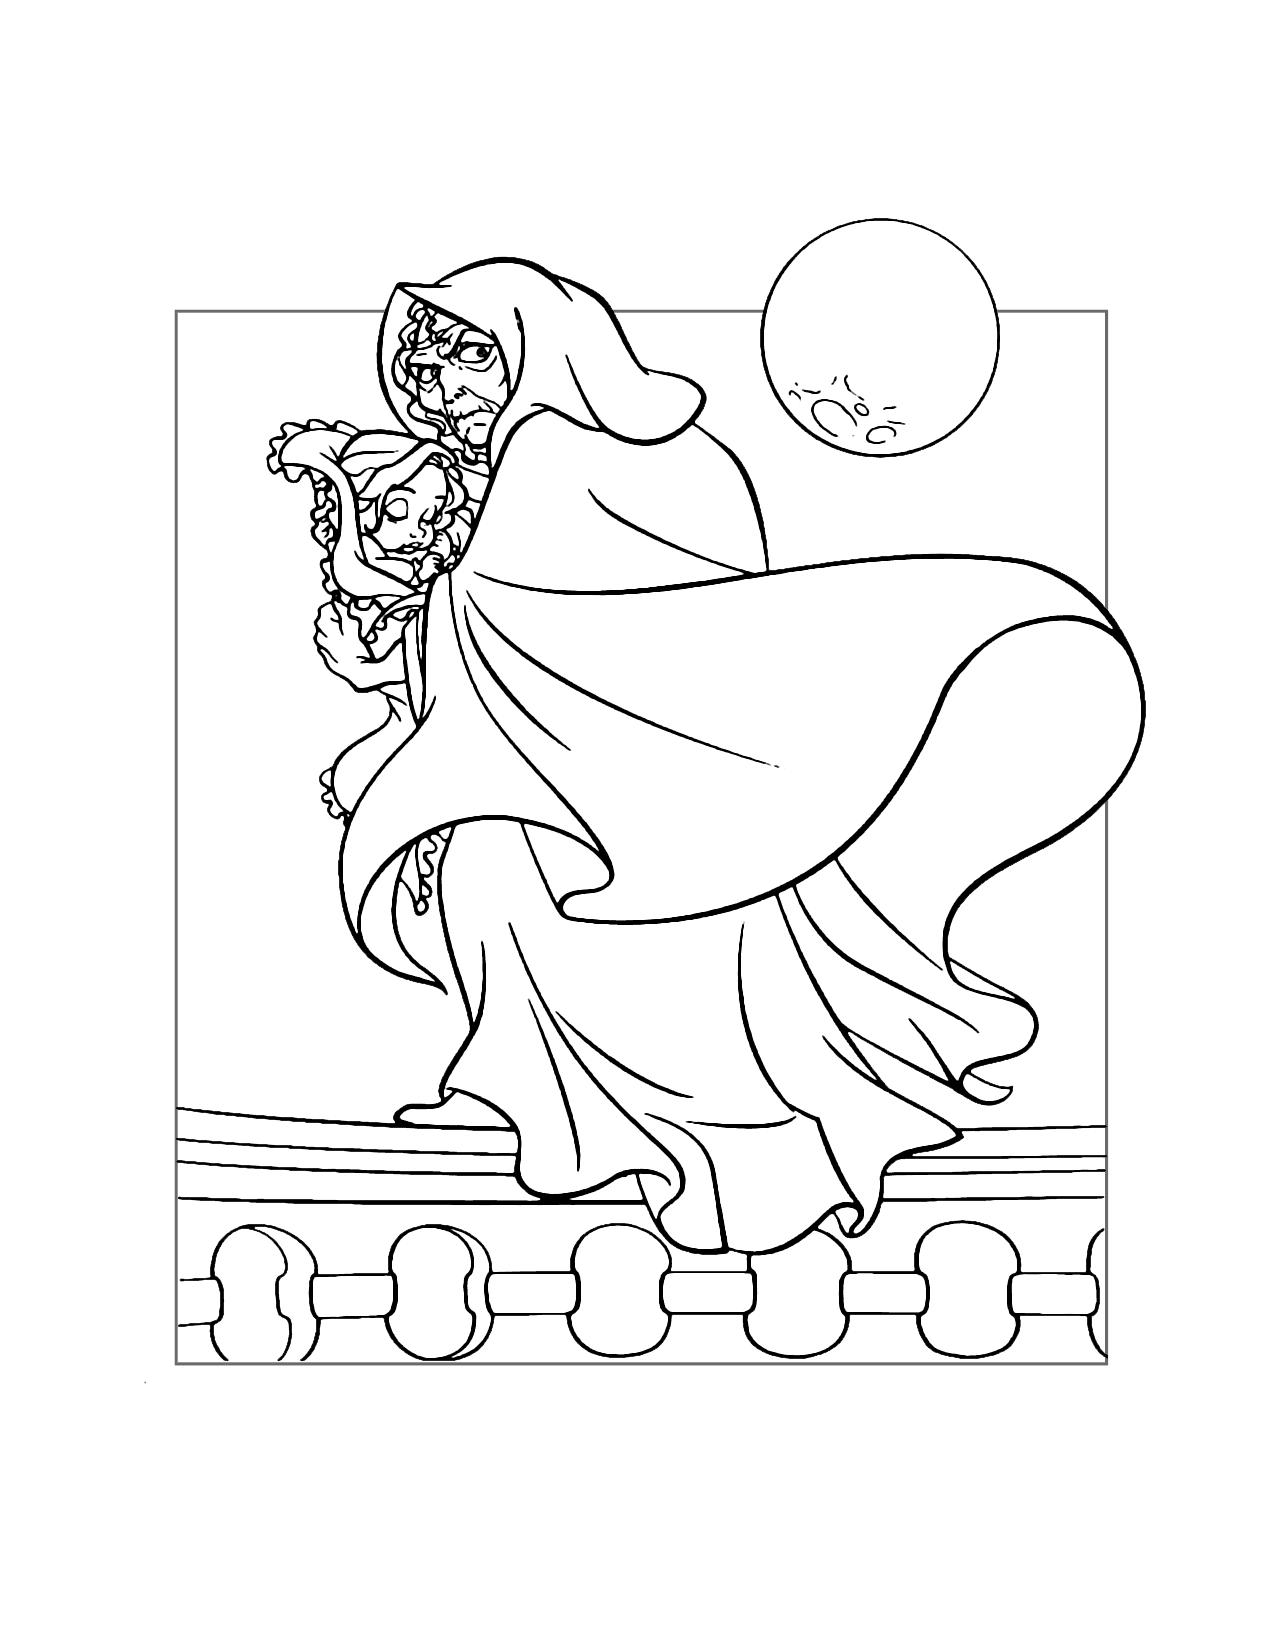 Gothel Steals Baby Rapunzel Coloring Page